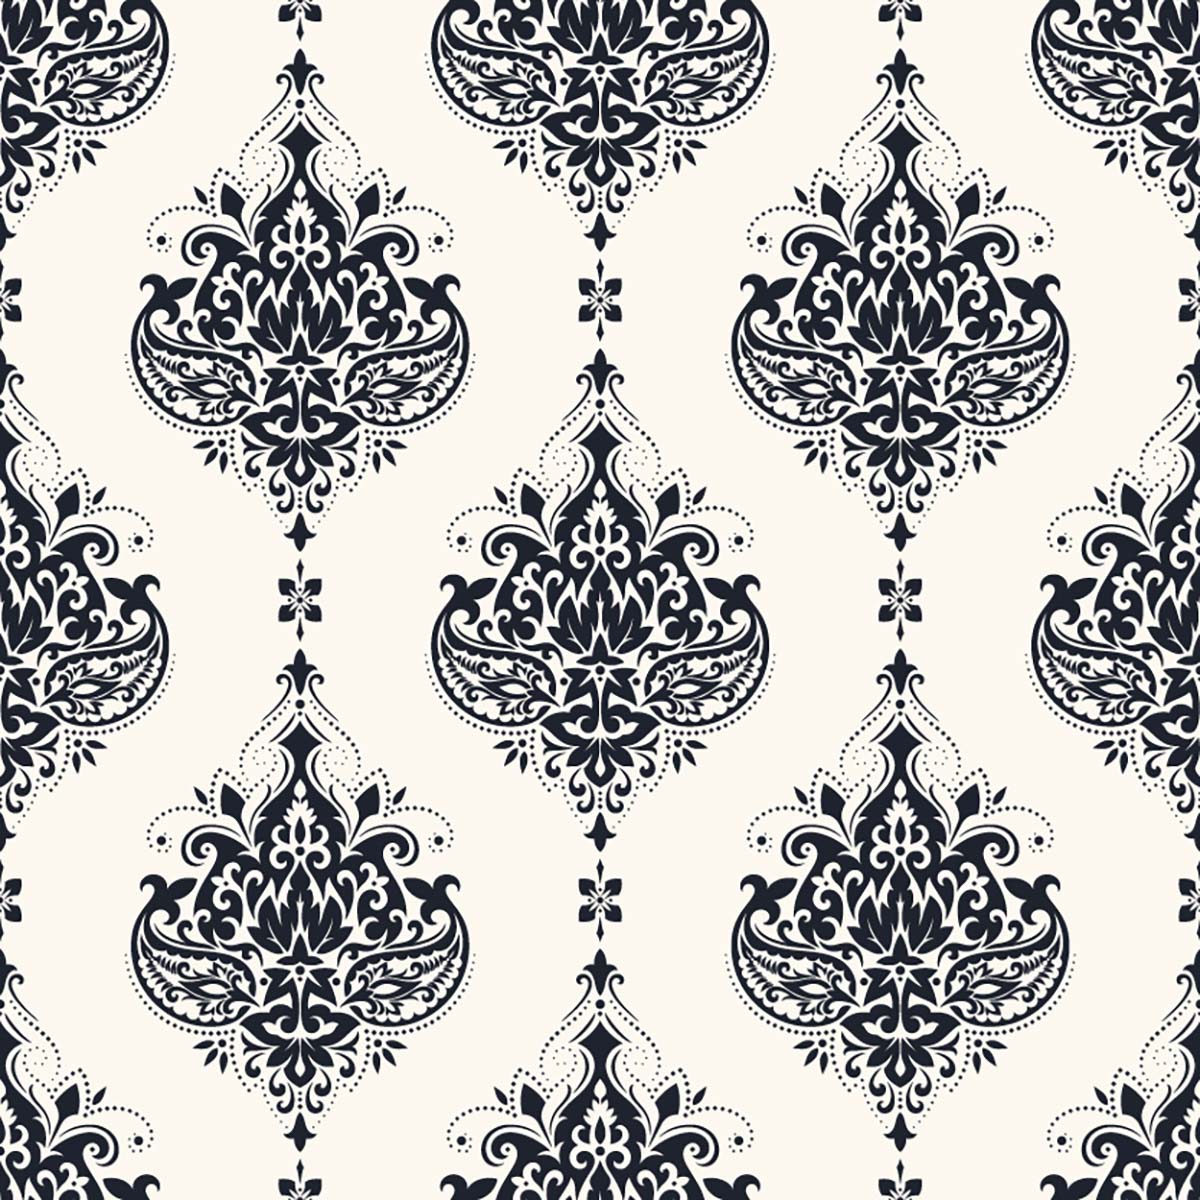 A pattern of black and white paisley